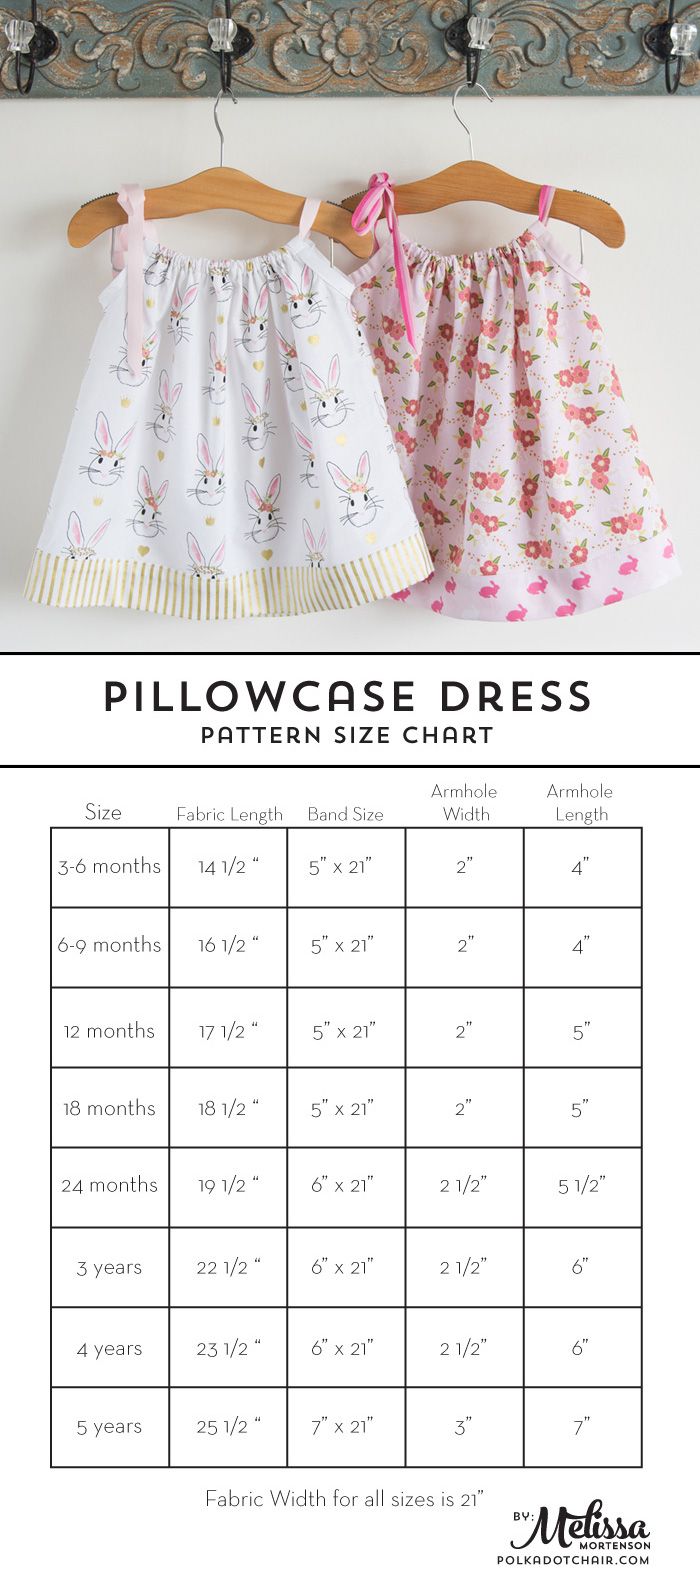 Learn how to sew a pillow case dress with this Pillowcase Dress Tutorial. Includ...